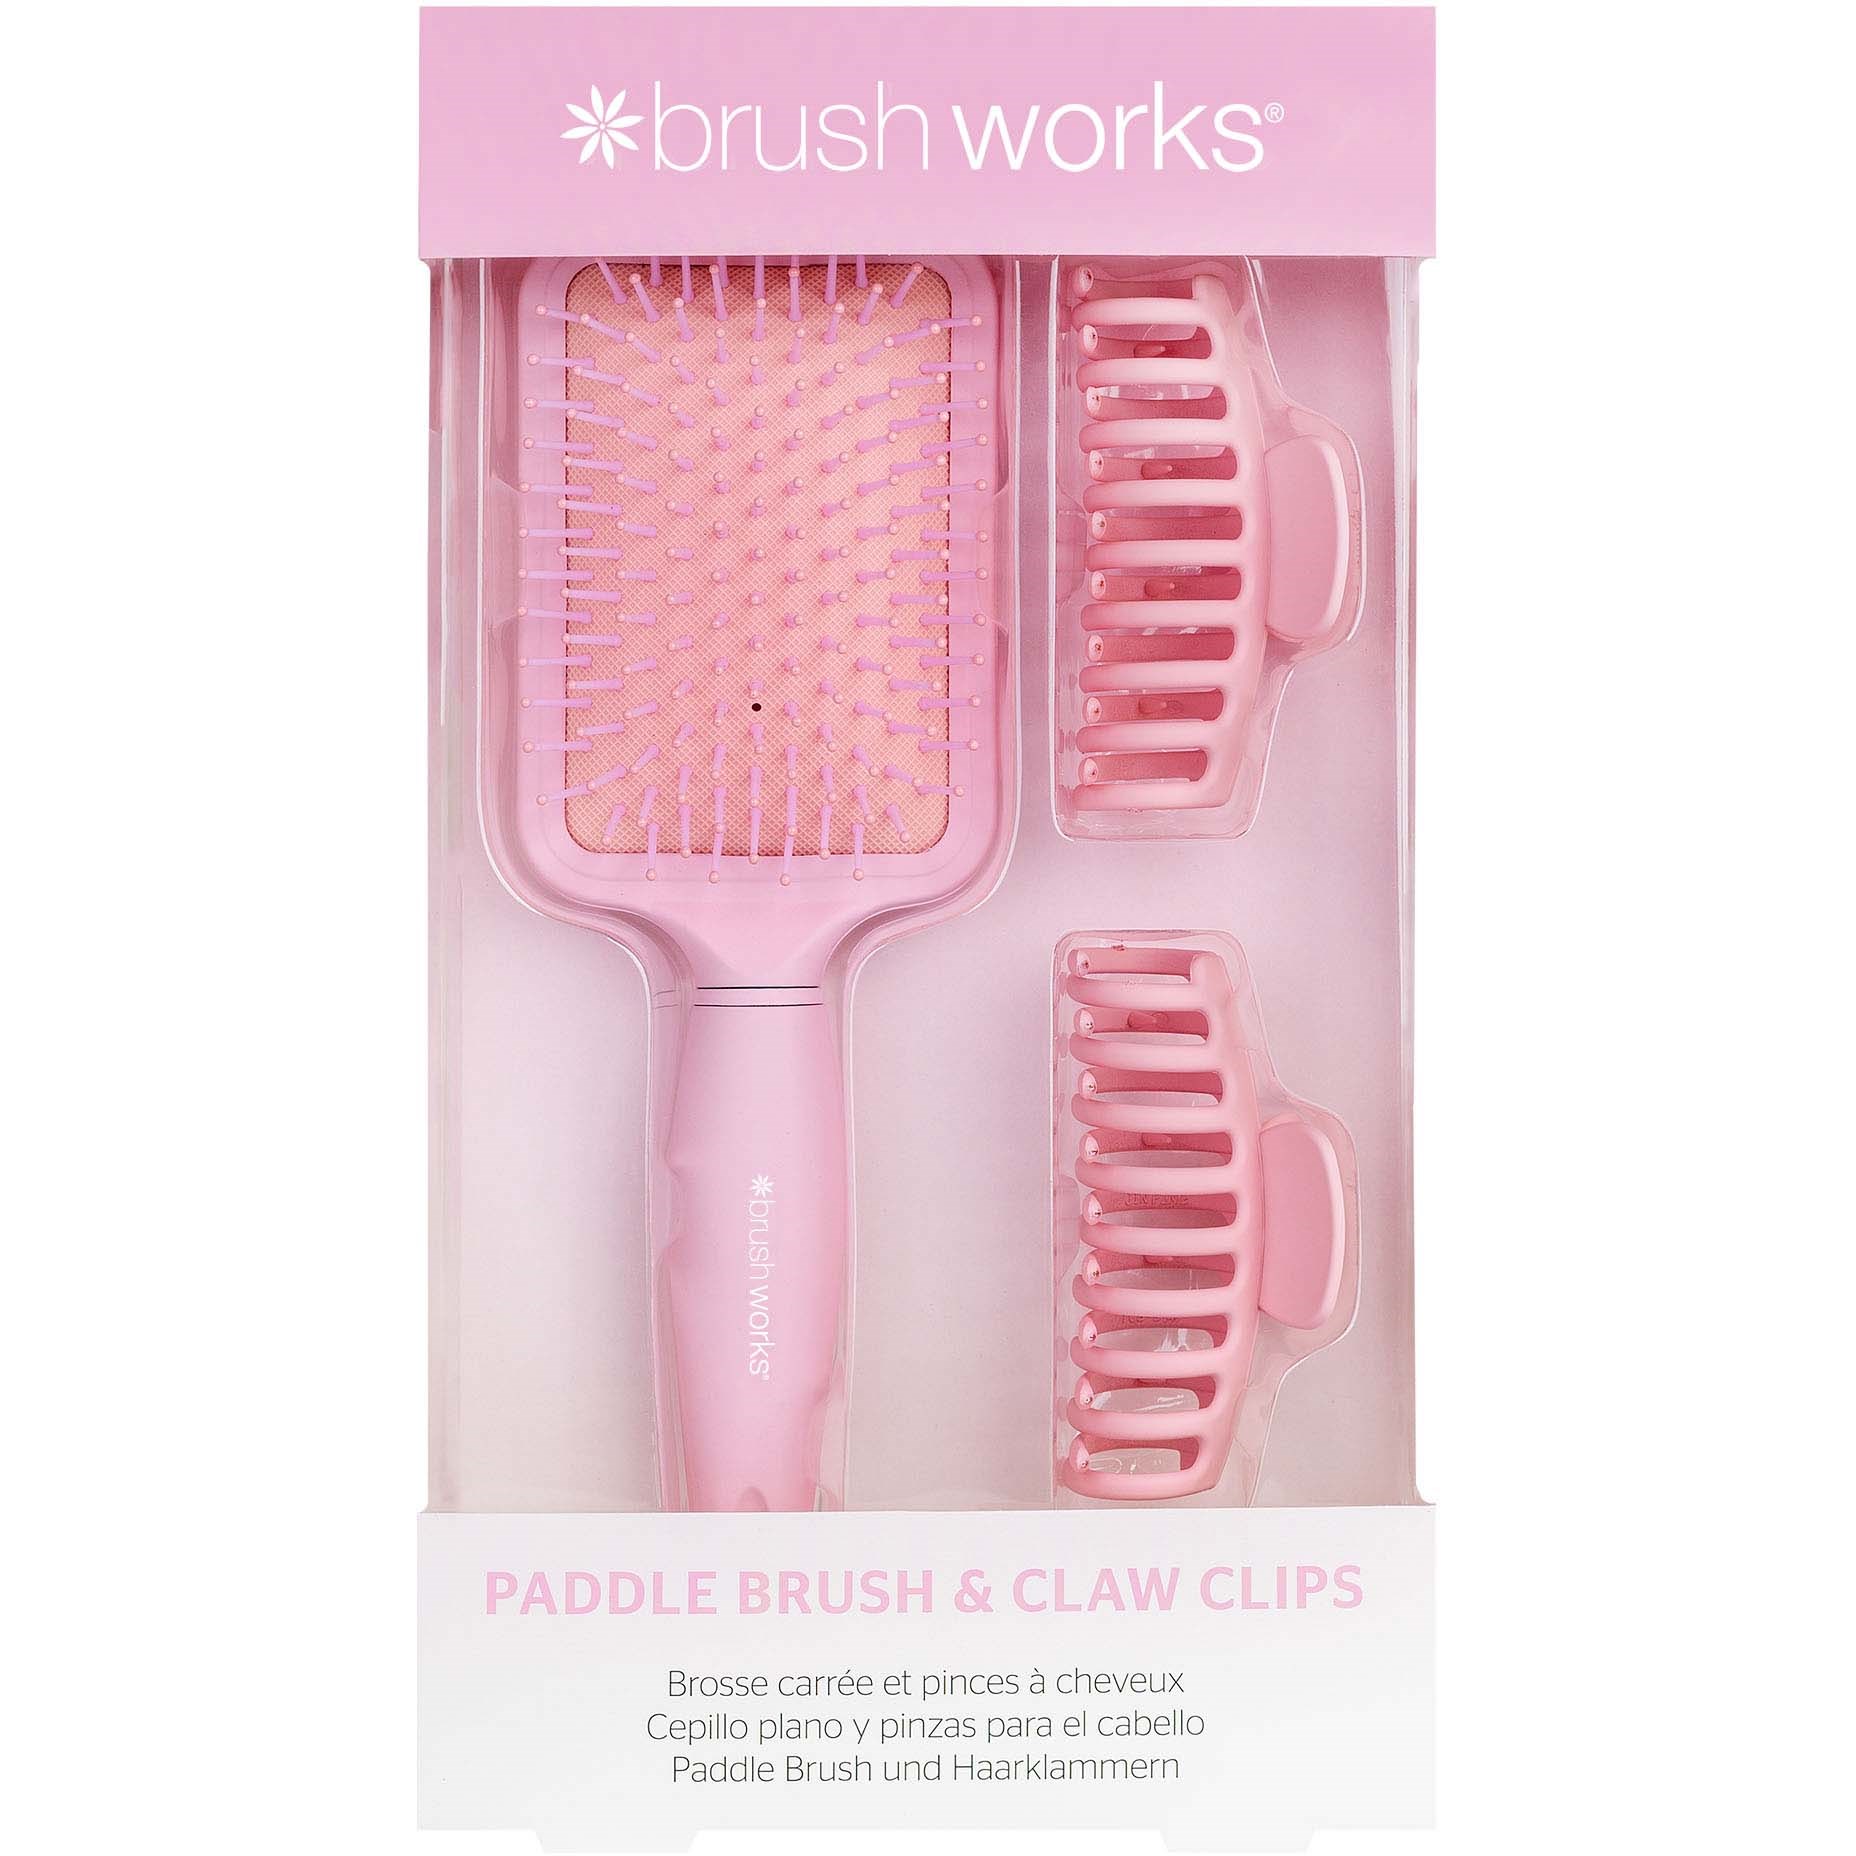 Läs mer om Brushworks Paddle Brush and Claw Clips